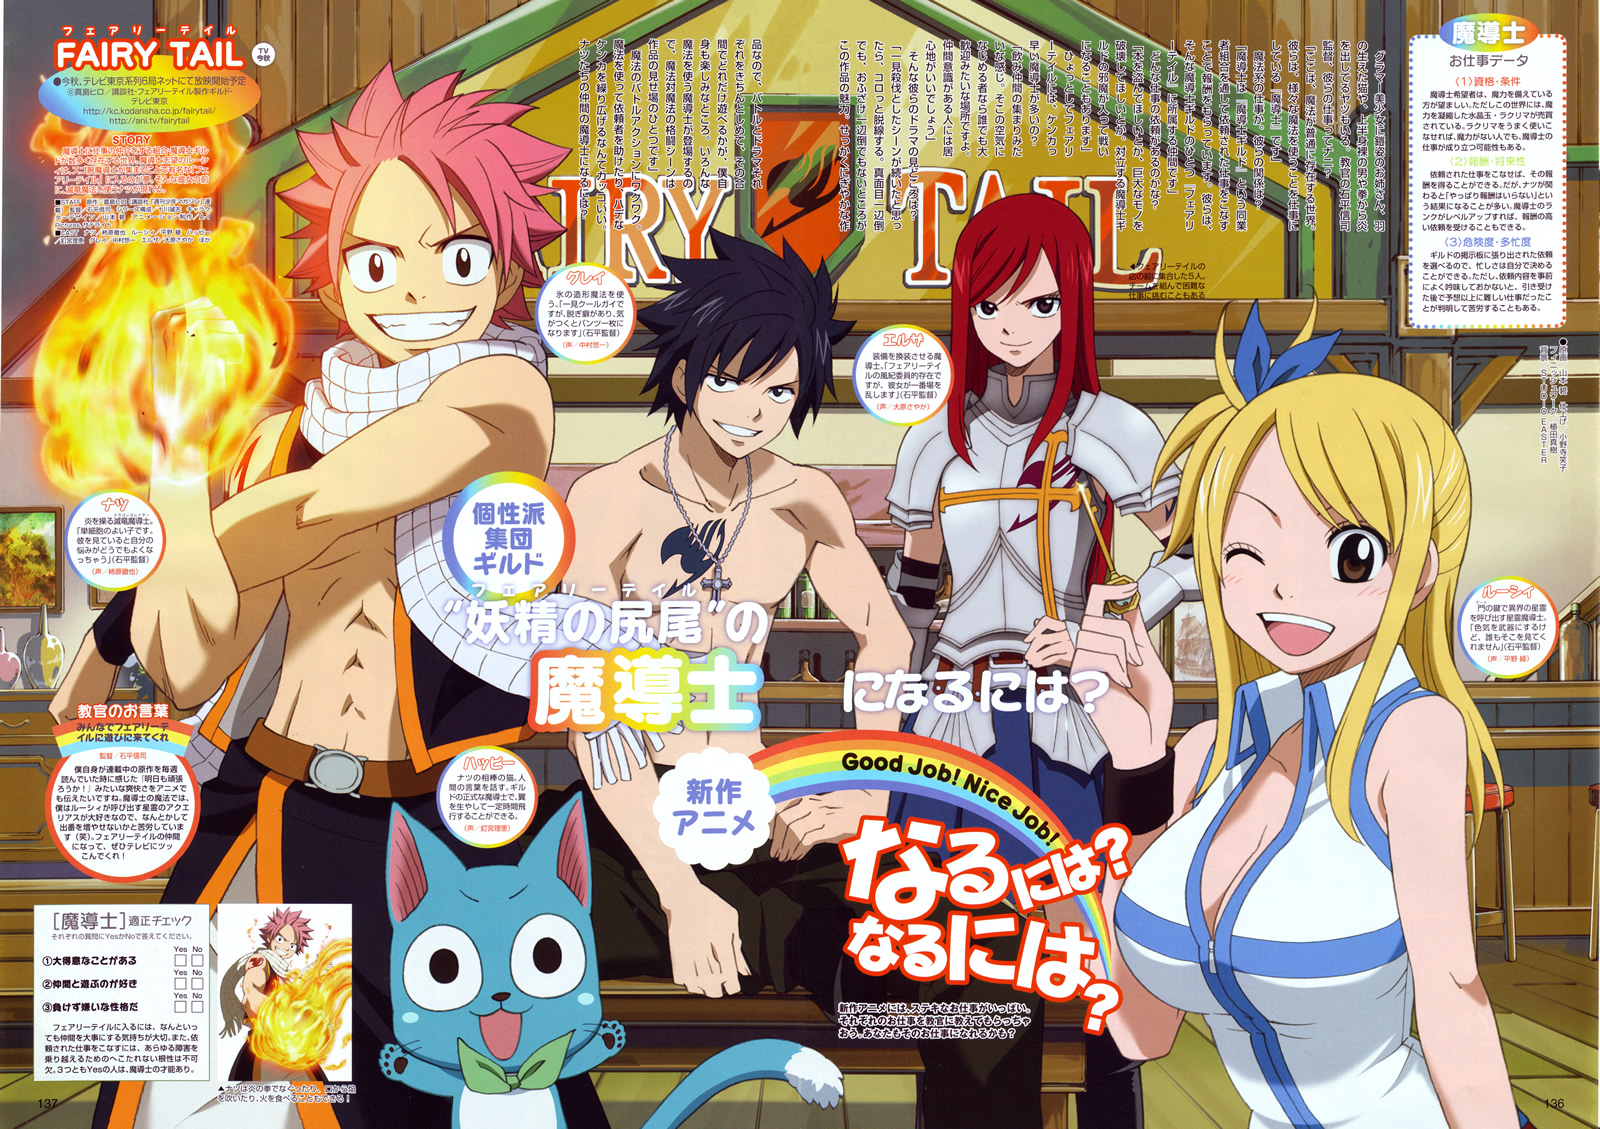 Chill with Team Natsu at Fairy Tail Cafe! [Photo Report